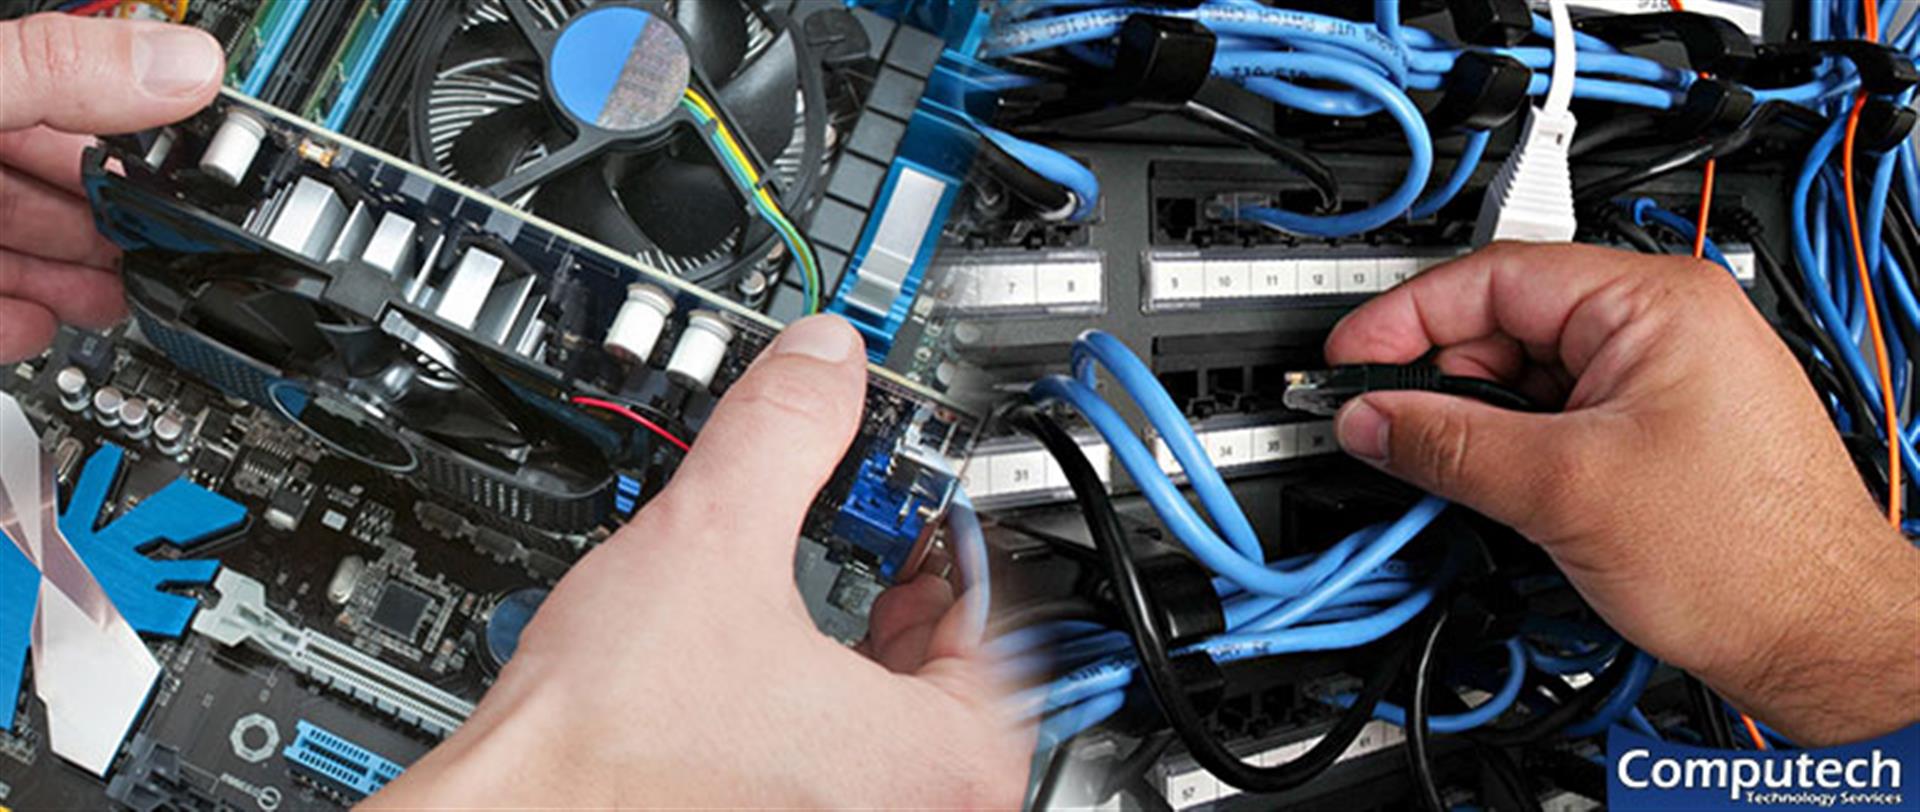 Danville Virginia On-Site PC & Printer Repairs, Networking, Voice & Data Cabling Solutions